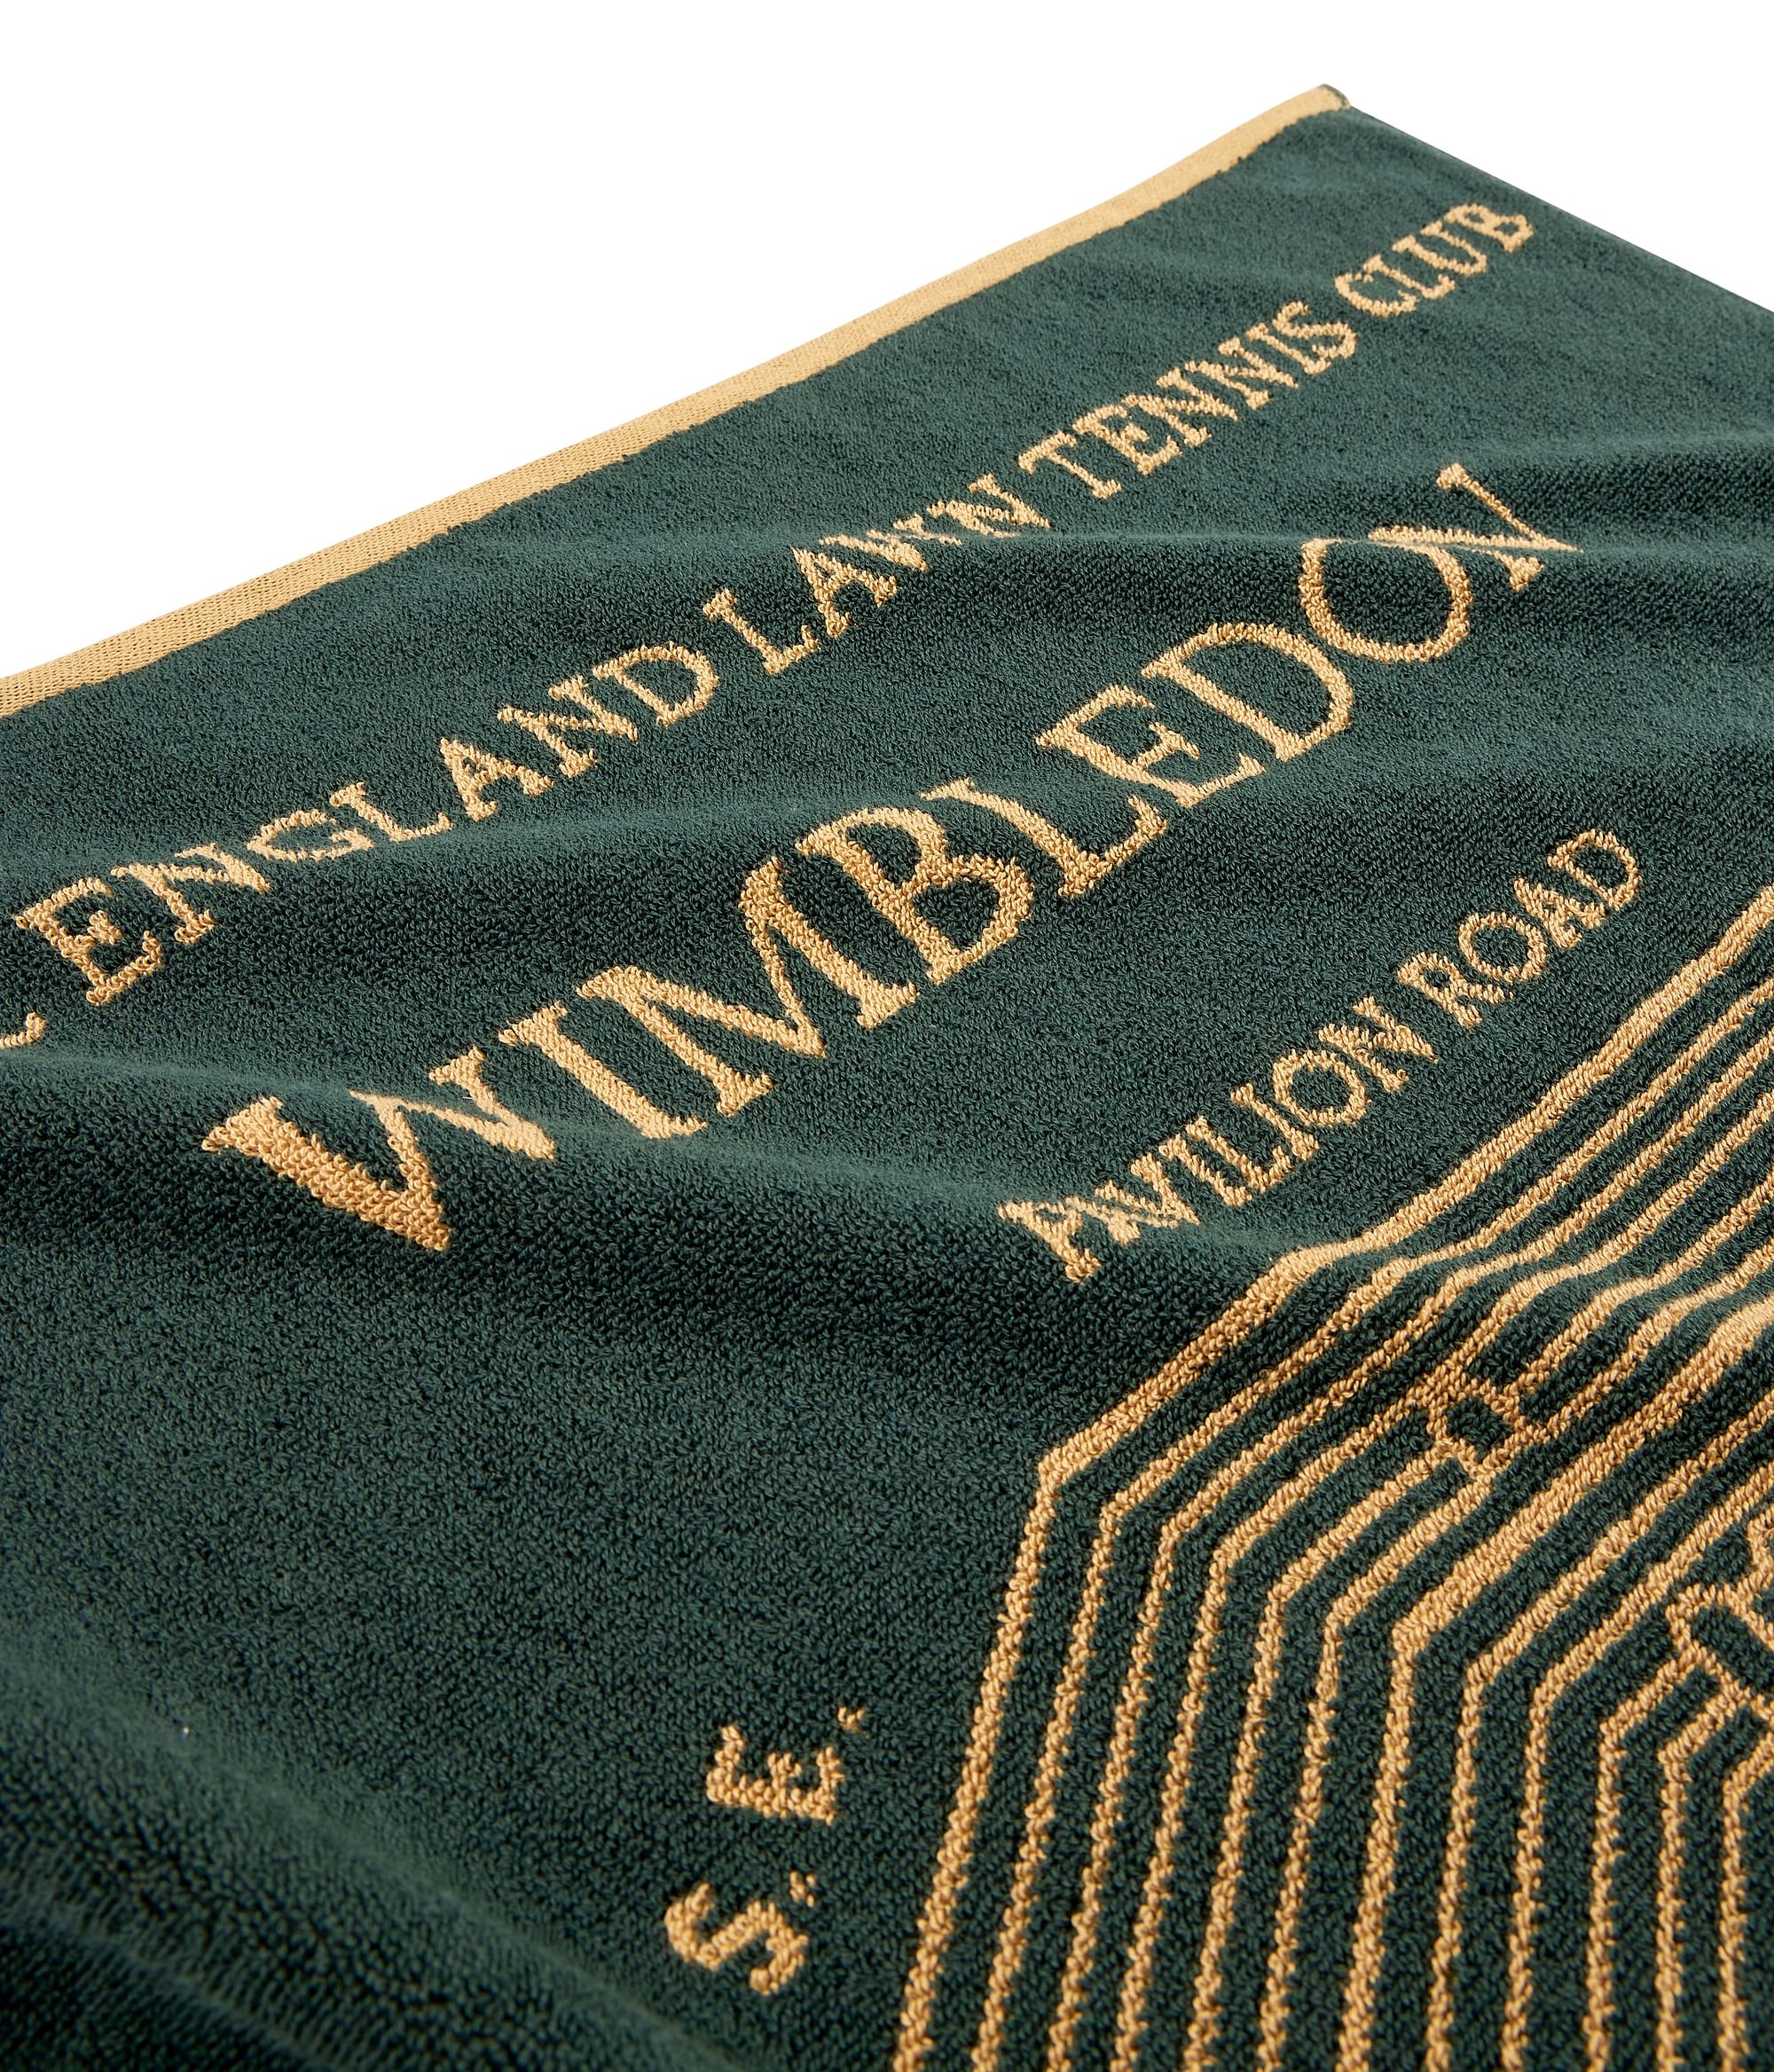 <div class="paragraphs"><p>Welspun to design premium towels for Wimbledon's 100 years at the Centre Court</p></div>